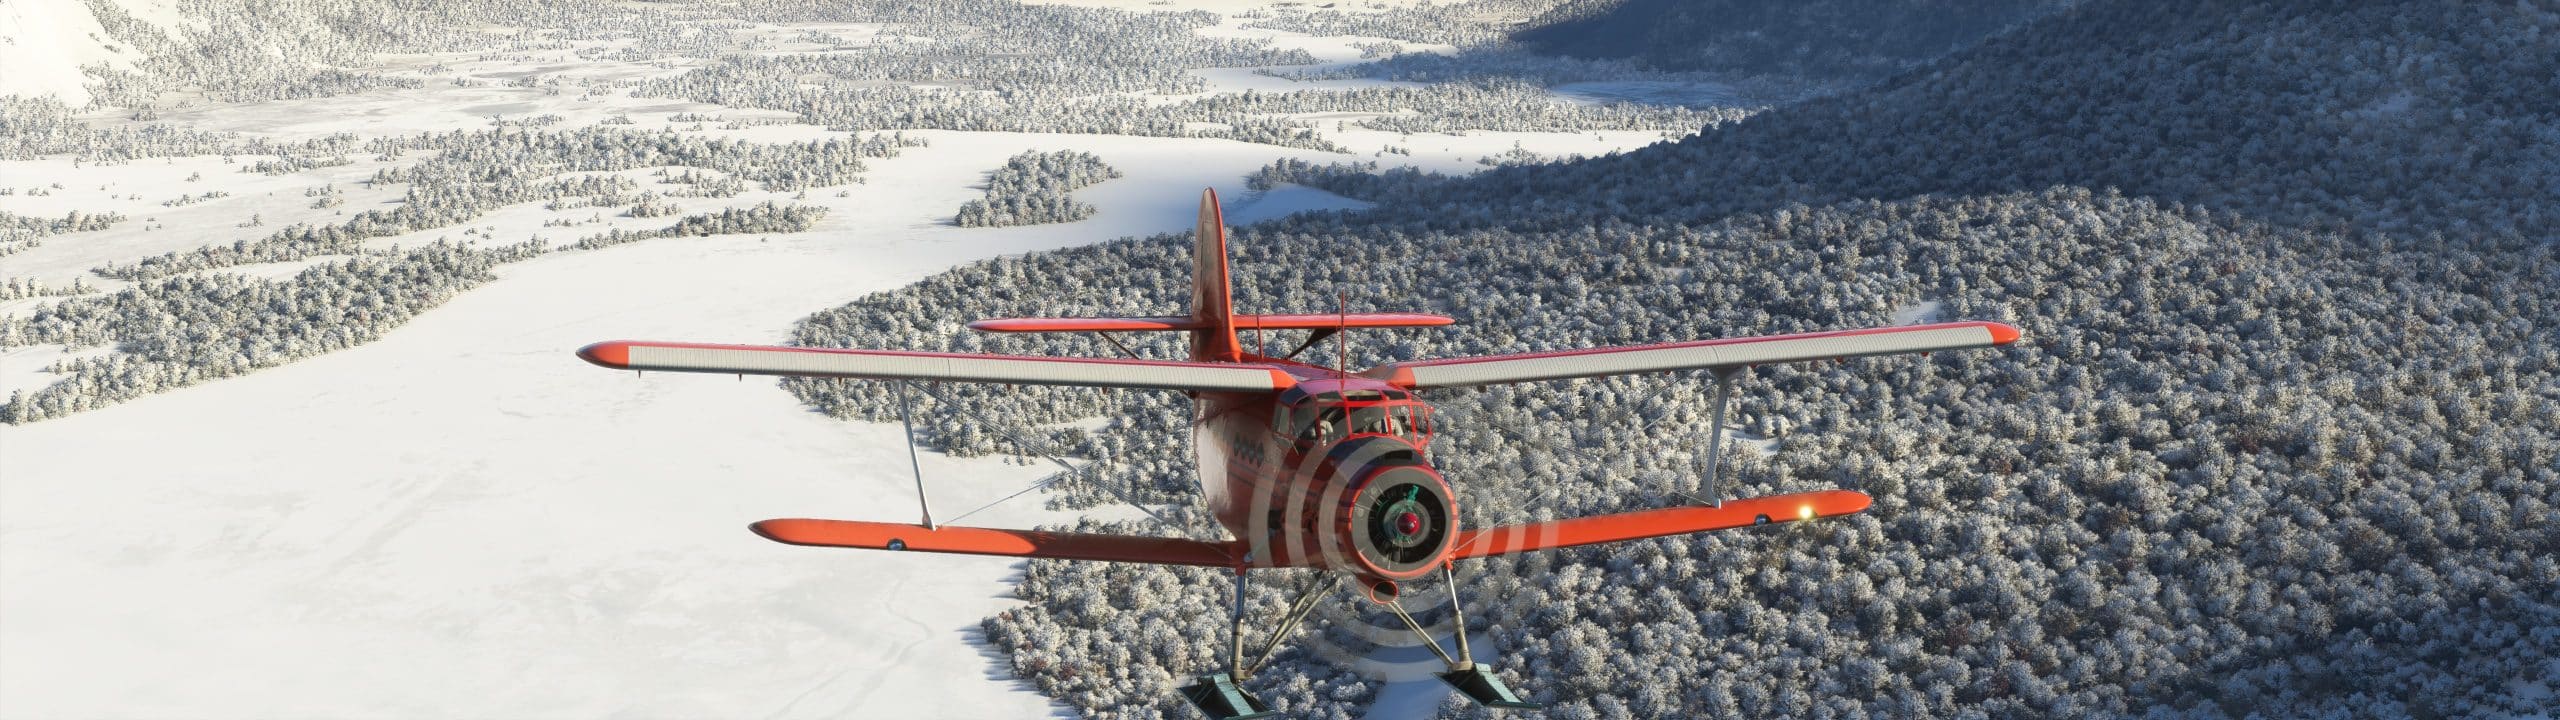 REVIEW: The An-2 for MSFS: a Brilliant Bush Biplane